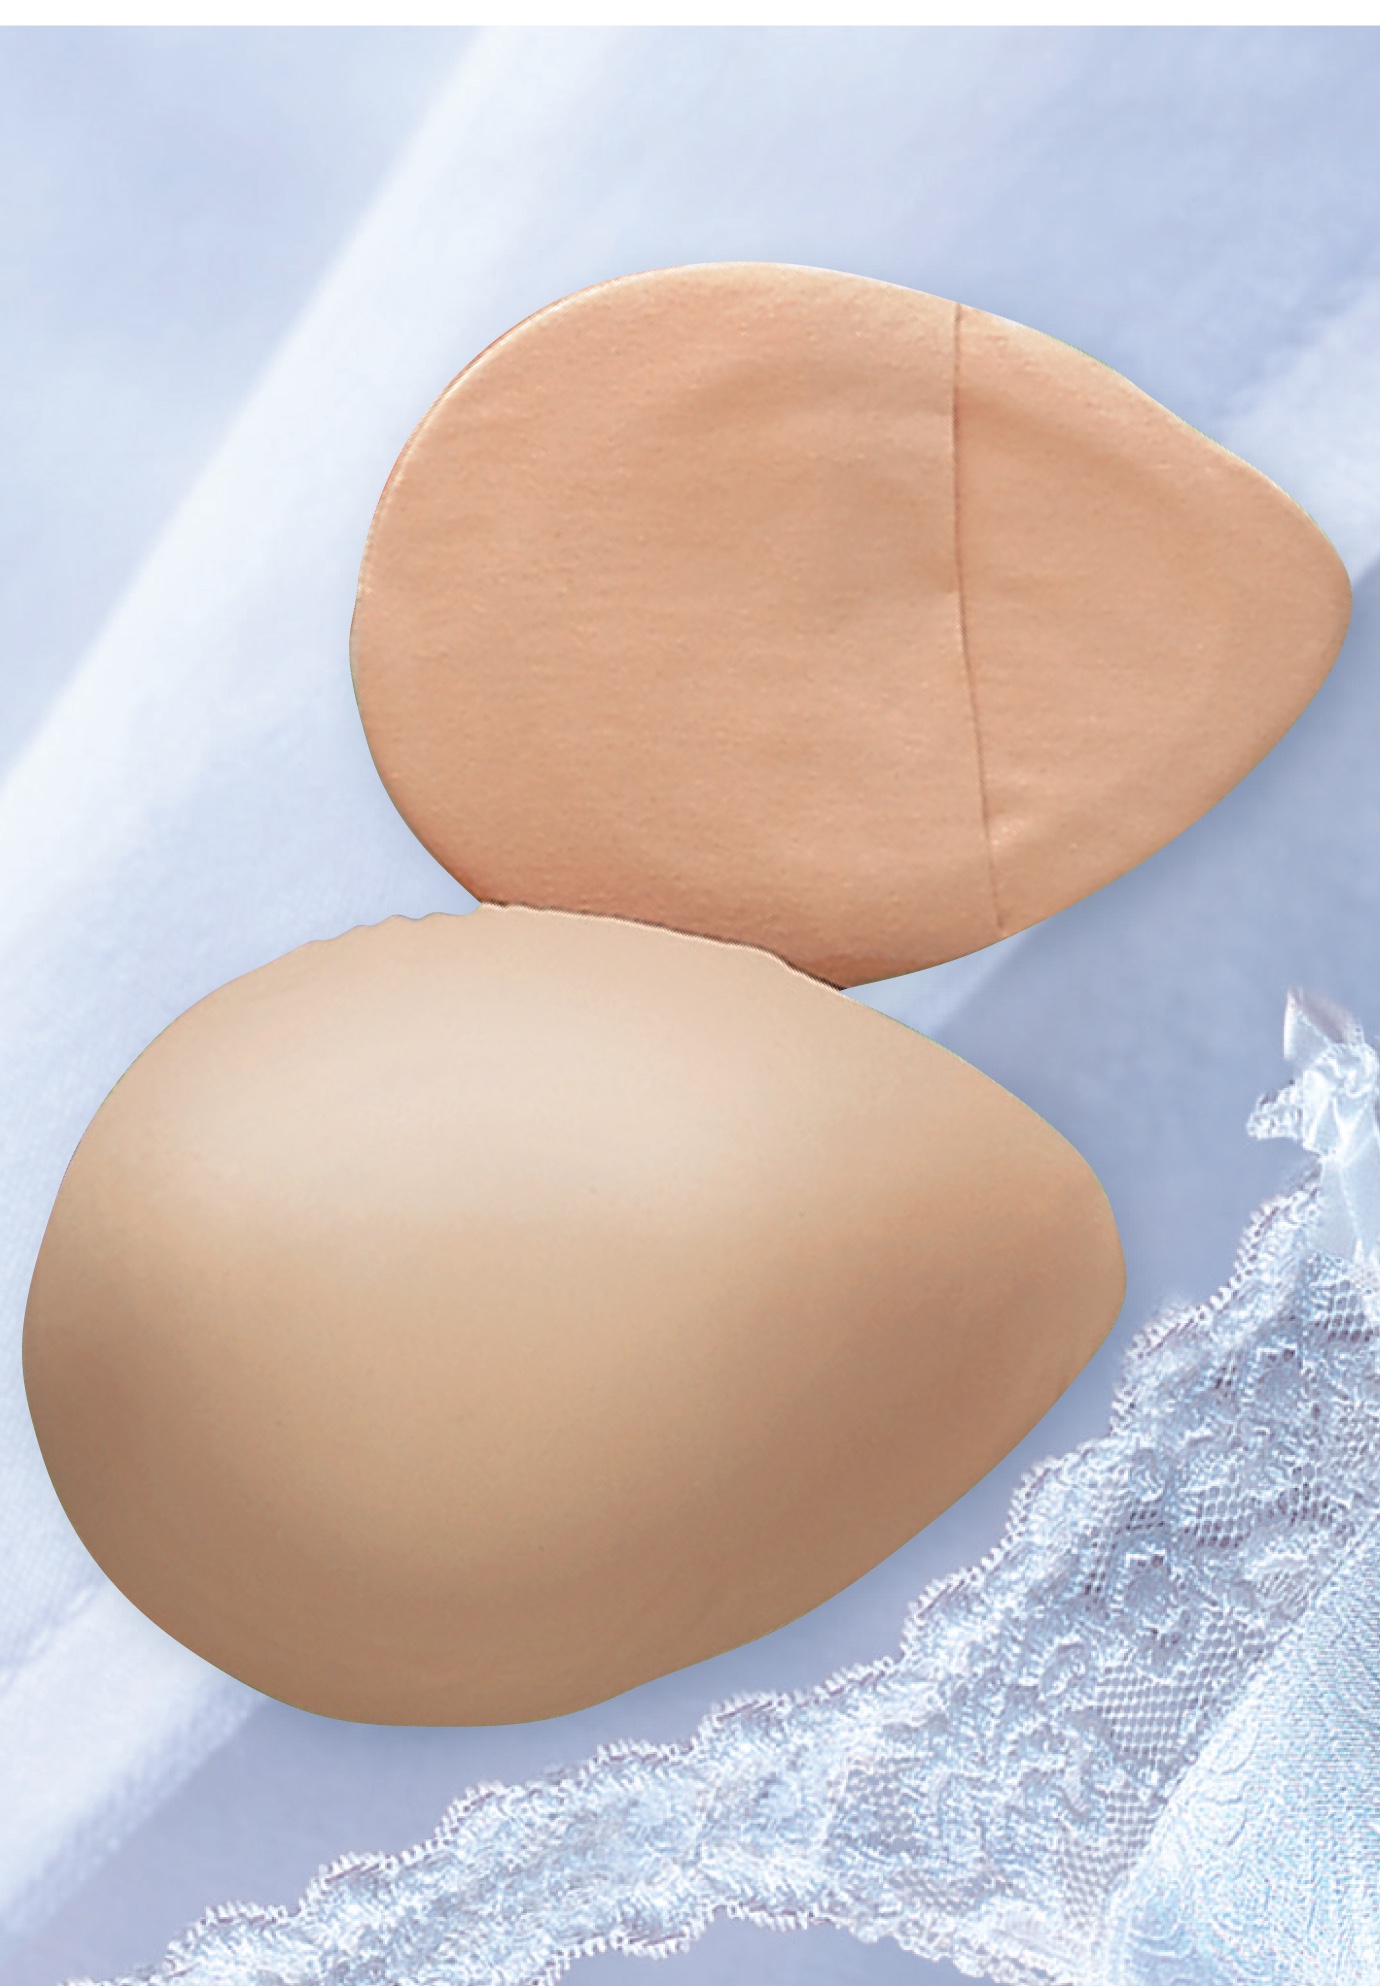 How To Wear Silicone Breast Forms